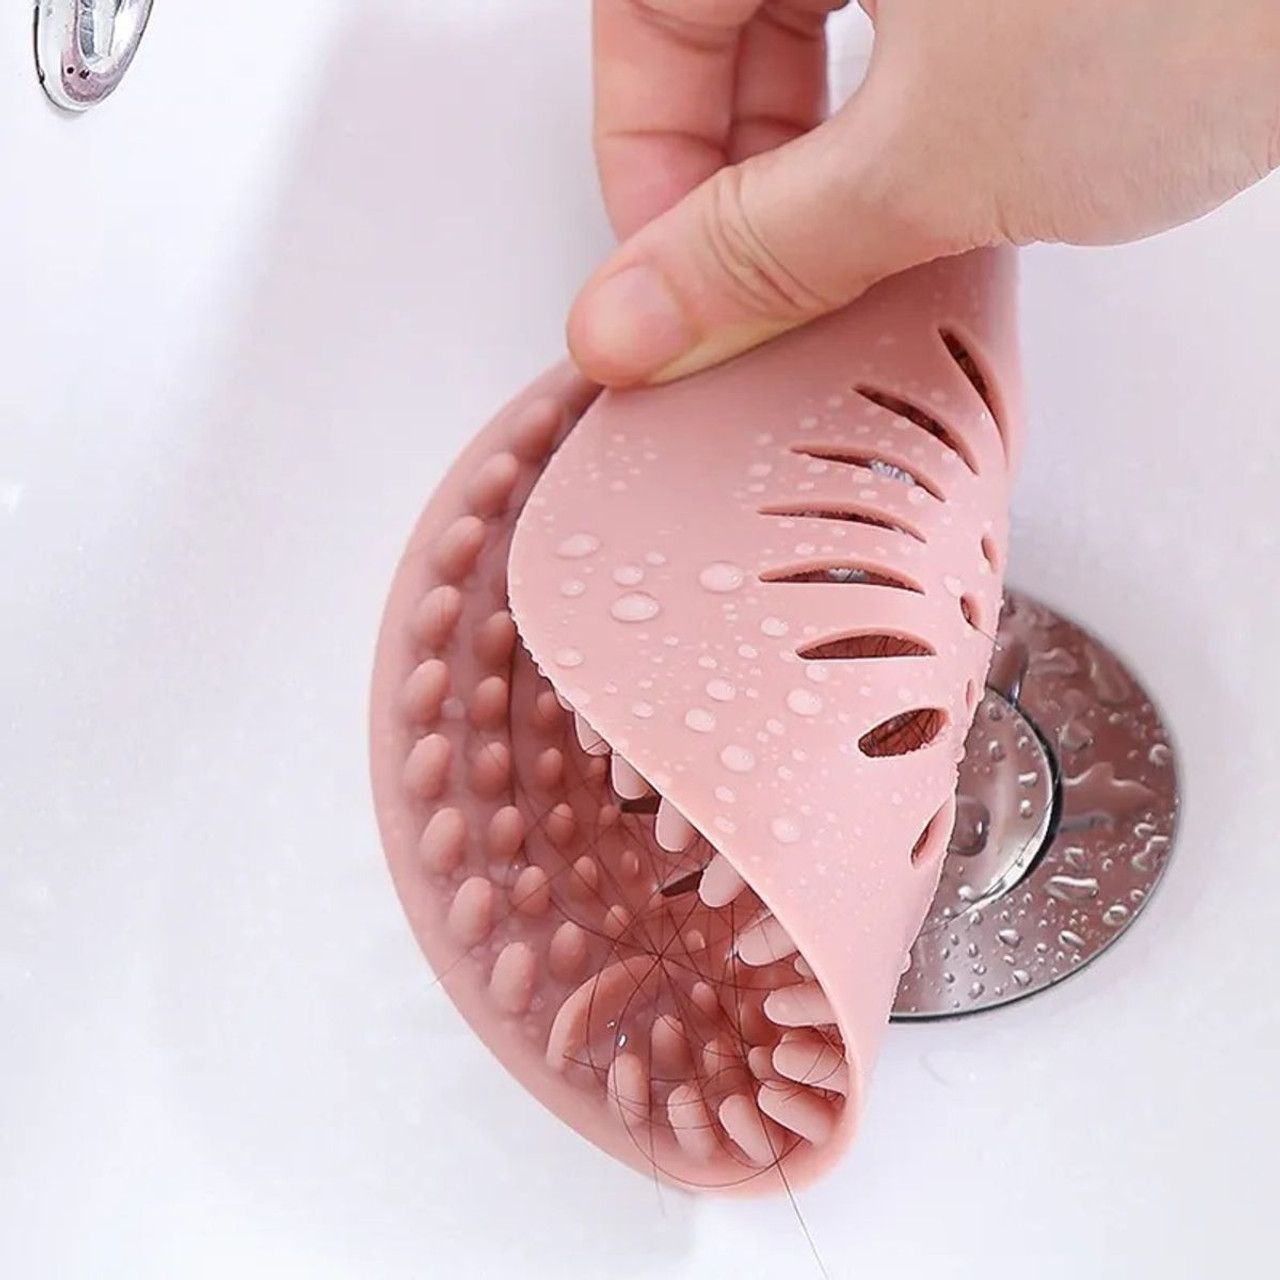 Silicone Drain Stopper (4-Pack) product image